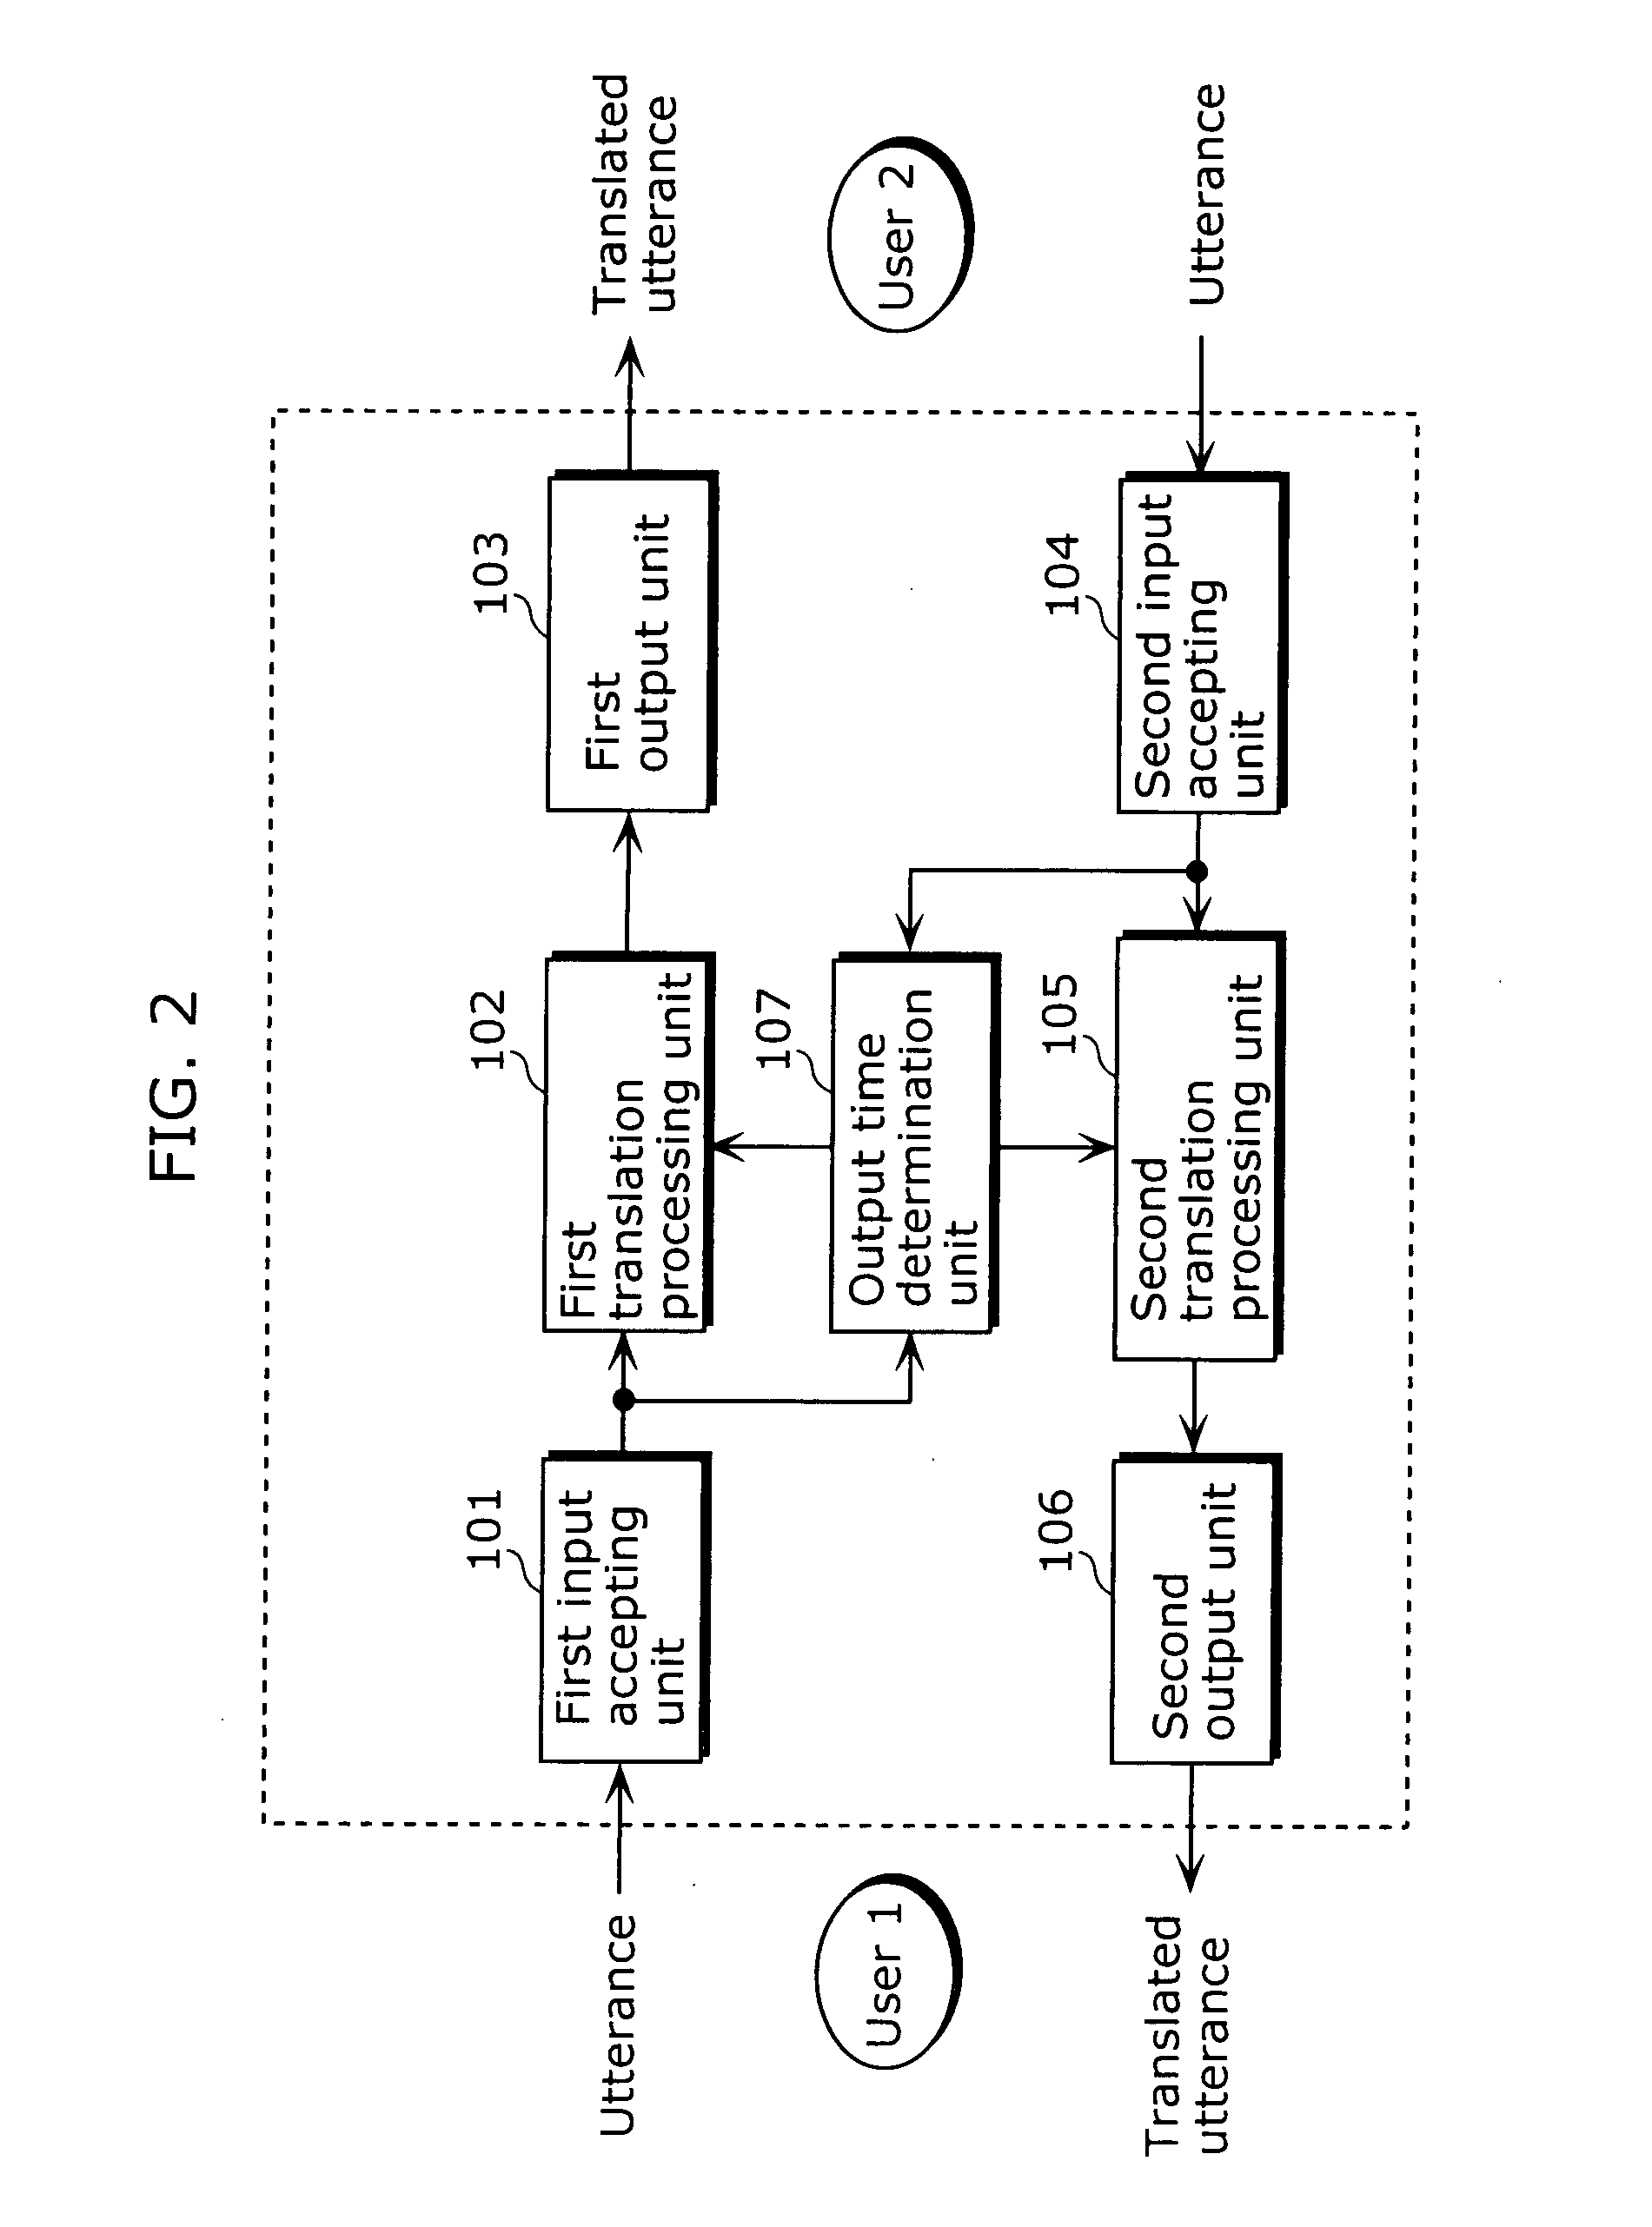 Dialogue supporting apparatus